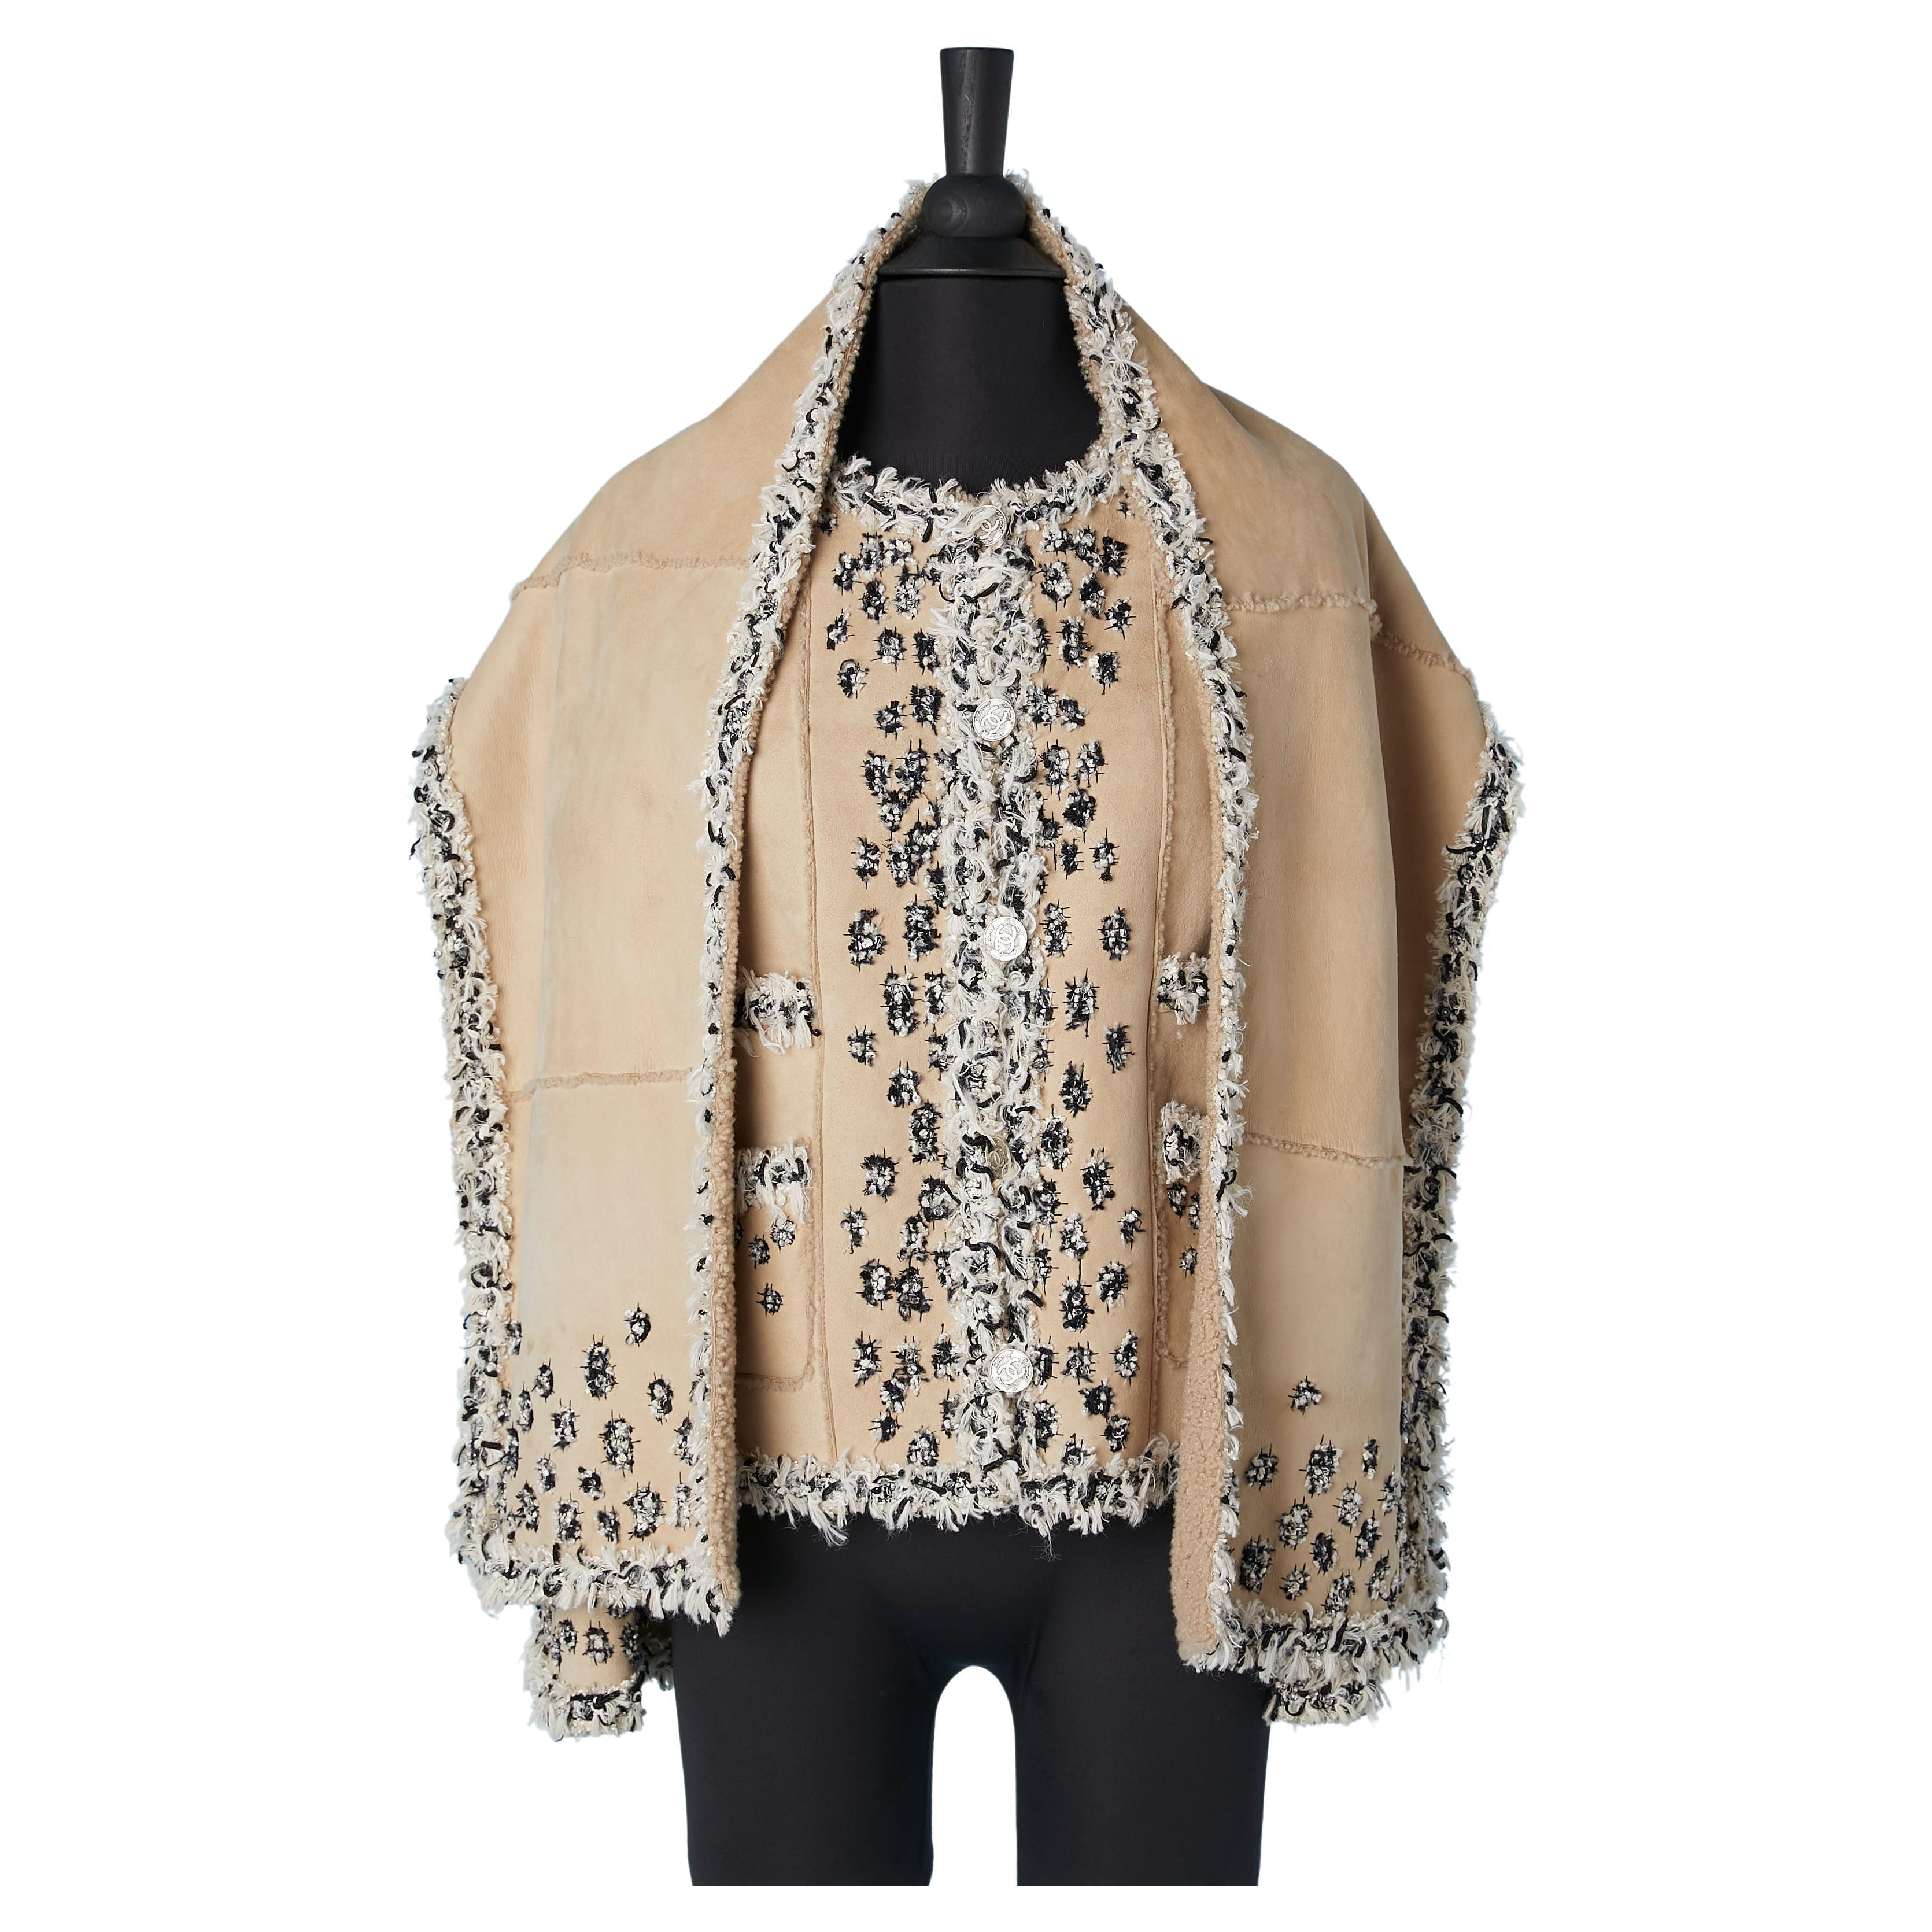 Beige baby-lamb shearling jacket and scarf with tweed embroideries Chanel 